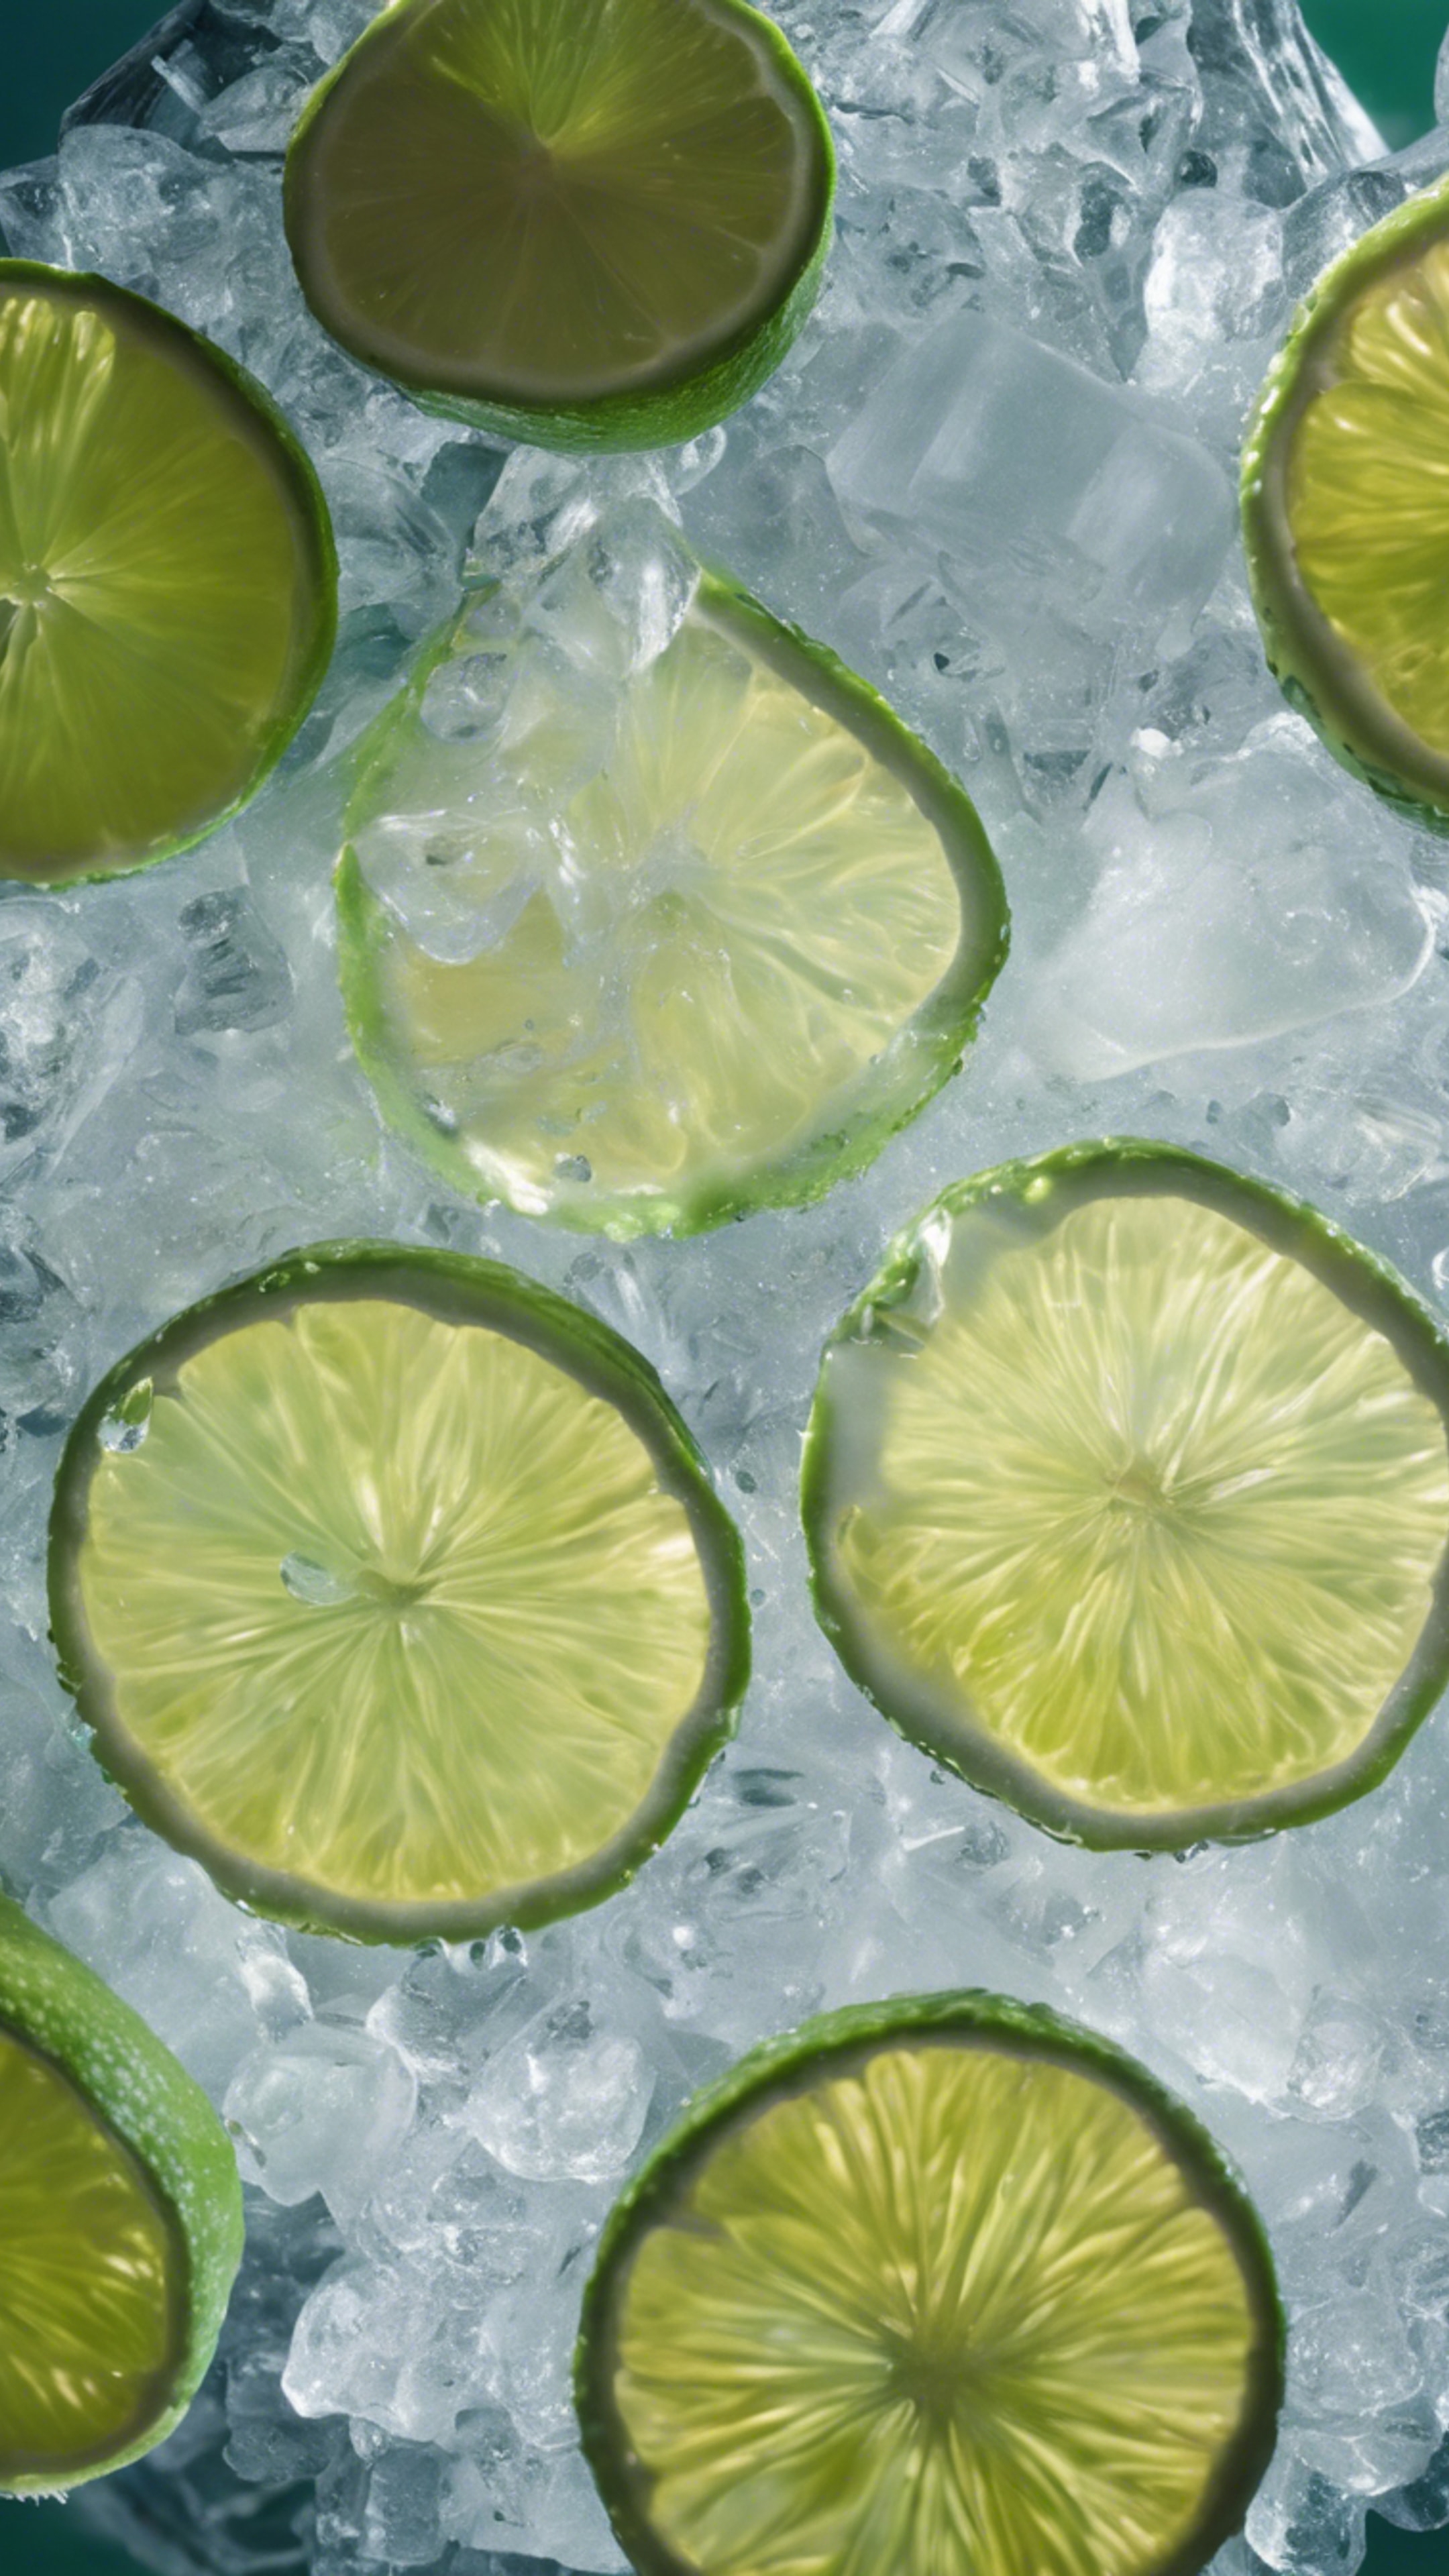 A refreshing overhead view of a sliced lime on the rim of a glass filled with ice cold cocktail. Divar kağızı[f4efbc933b954446941d]